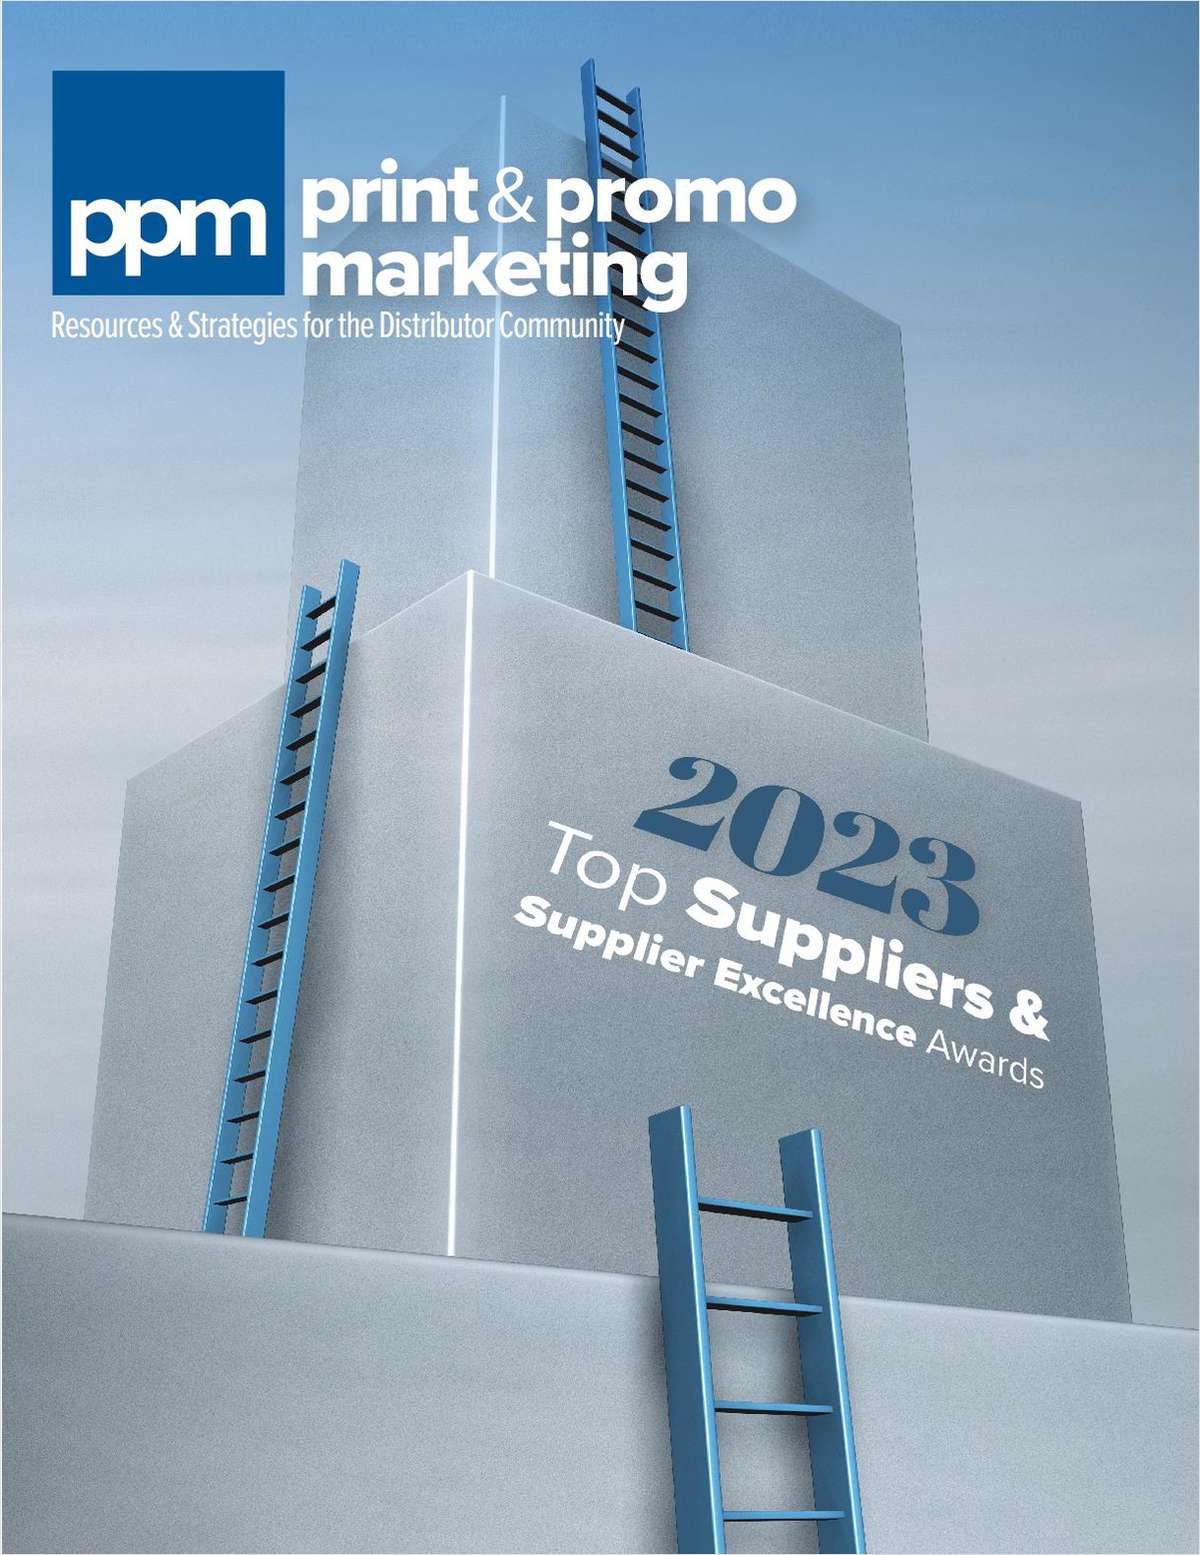 The Print & Promo Marketing 2023 Top Suppliers List